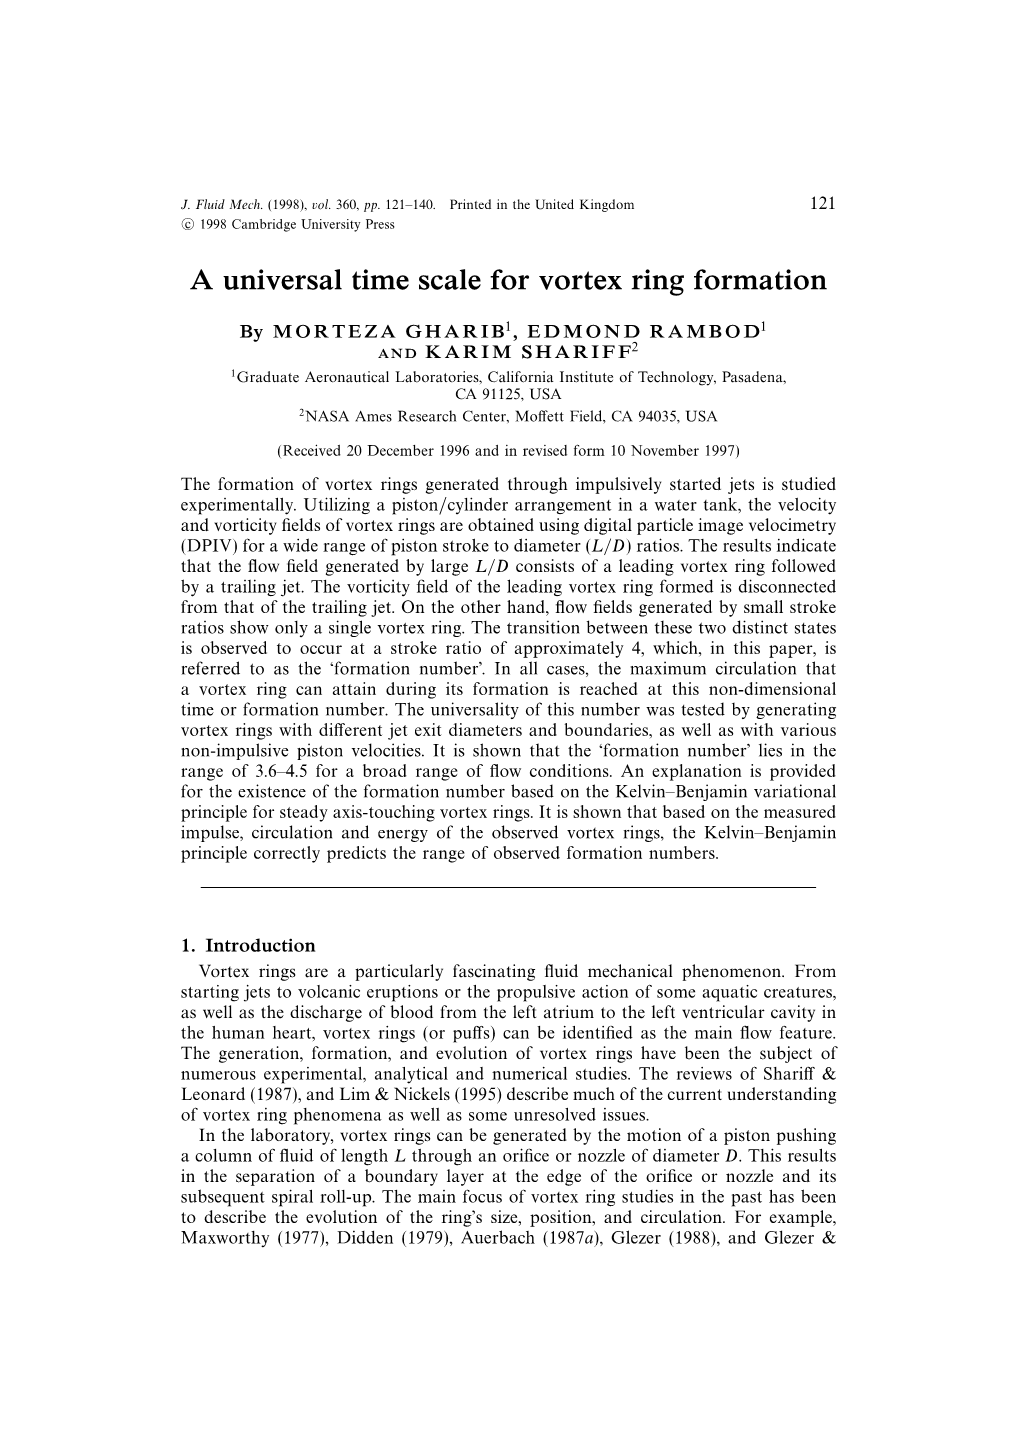 A Universal Time Scale for Vortex Ring Formation